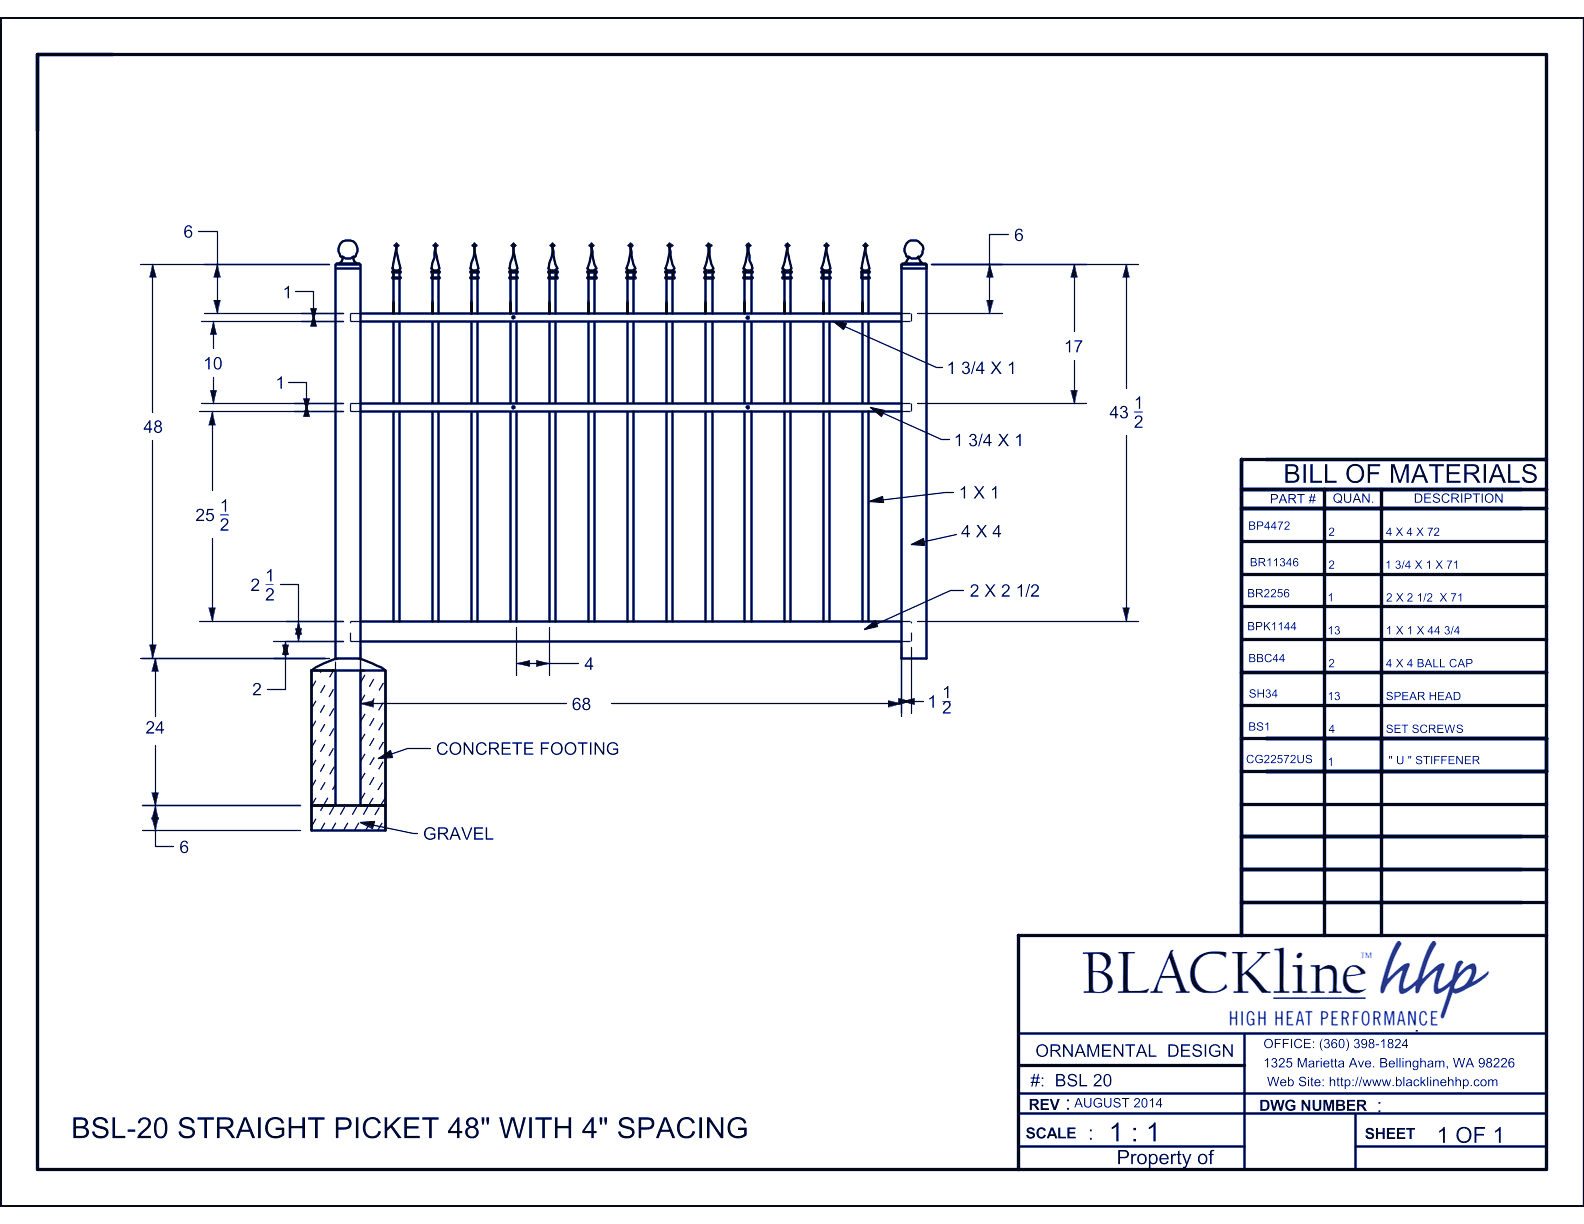 BSL-20: Straight Picket 48" with 4" Spacing